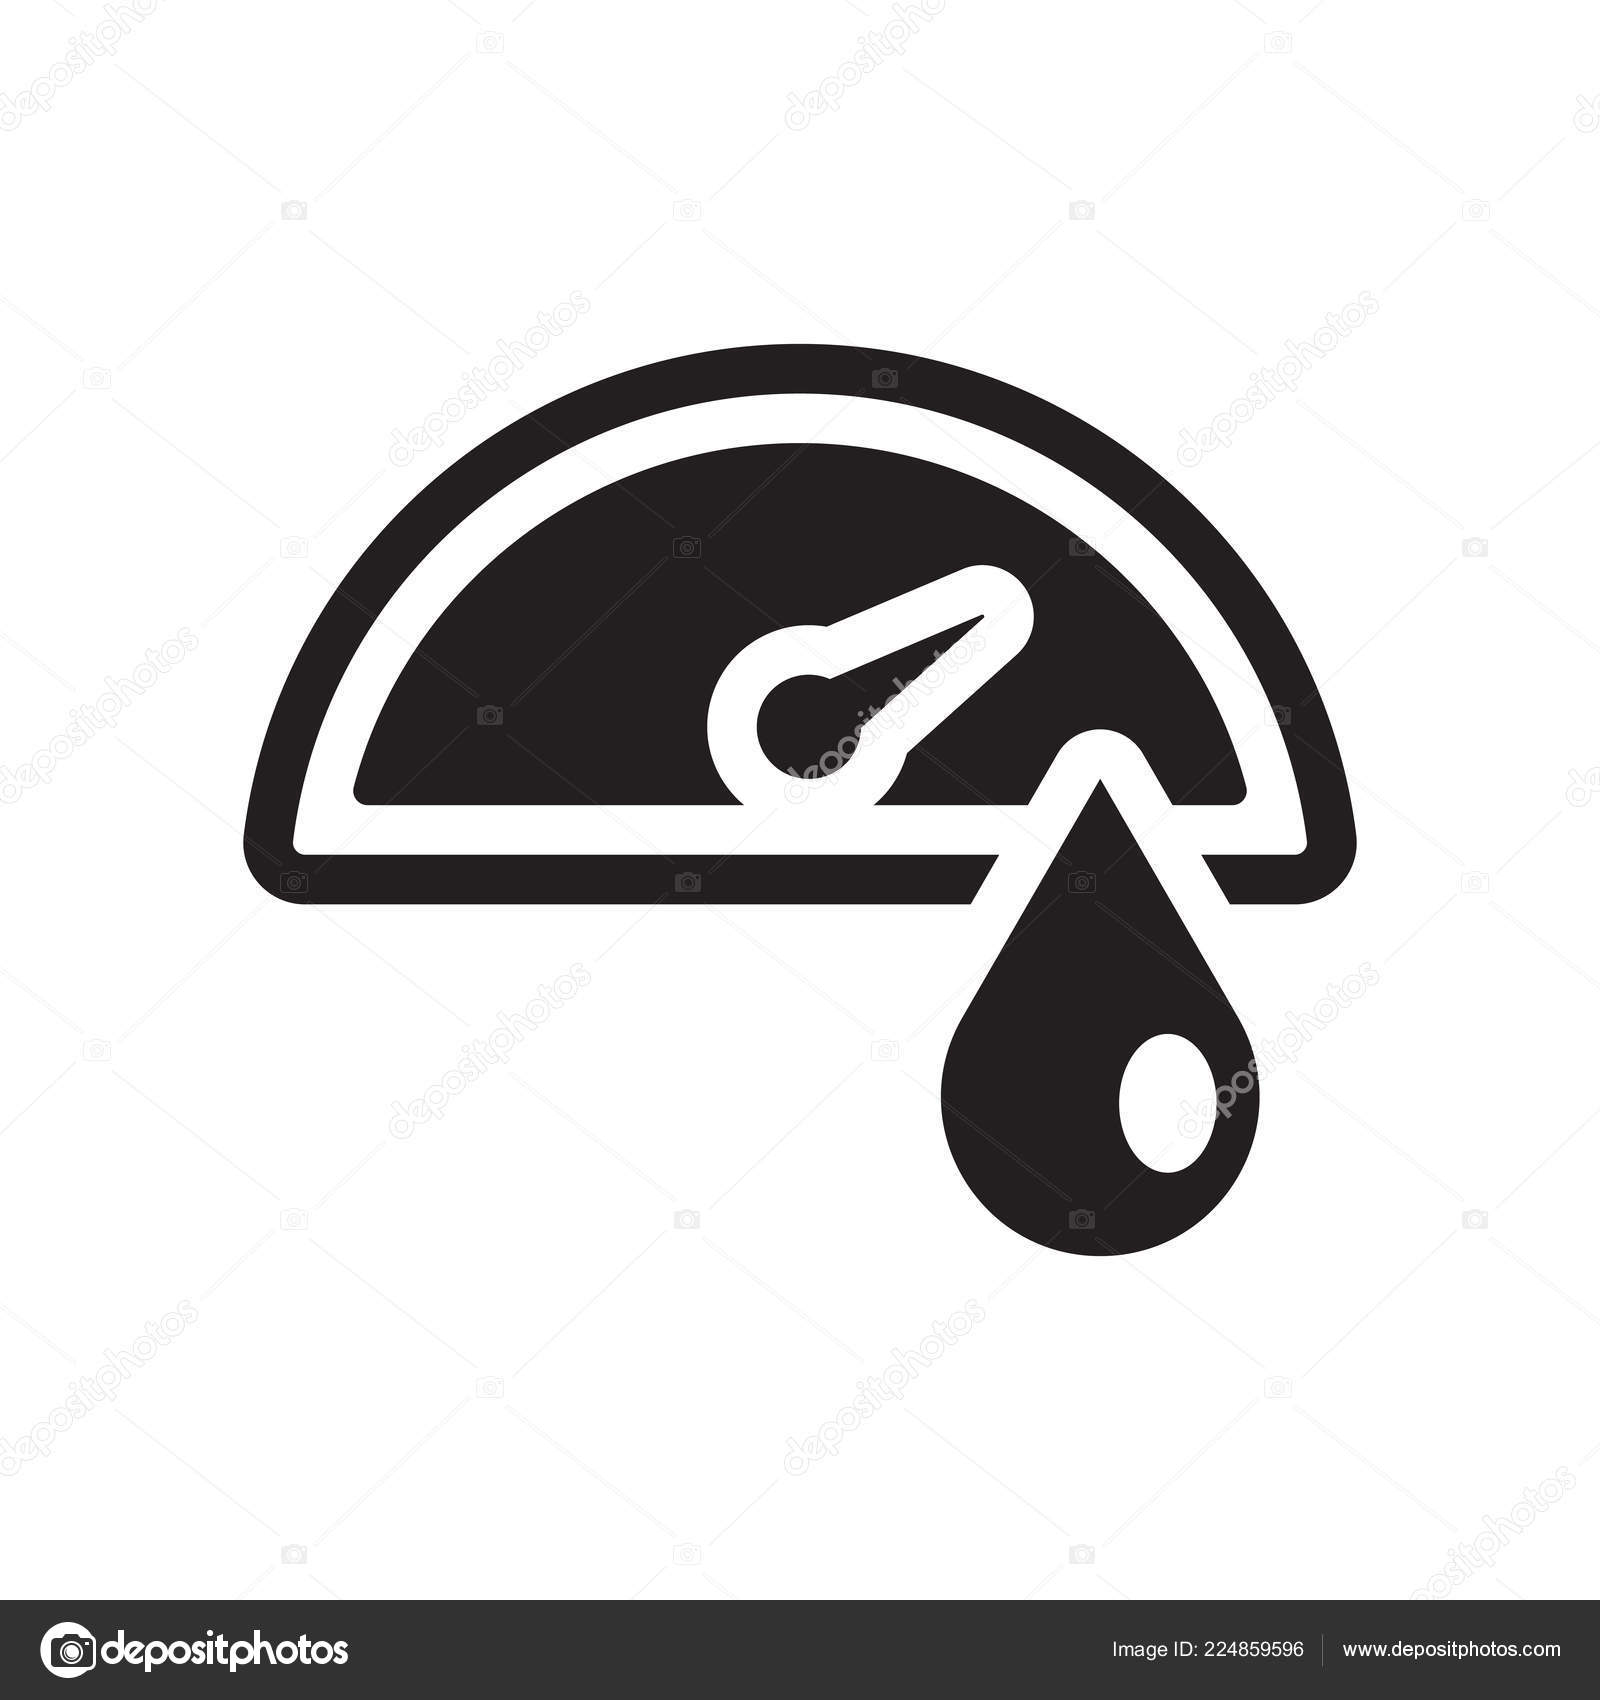 Hygrometer icon meteorology weather Royalty Free Vector